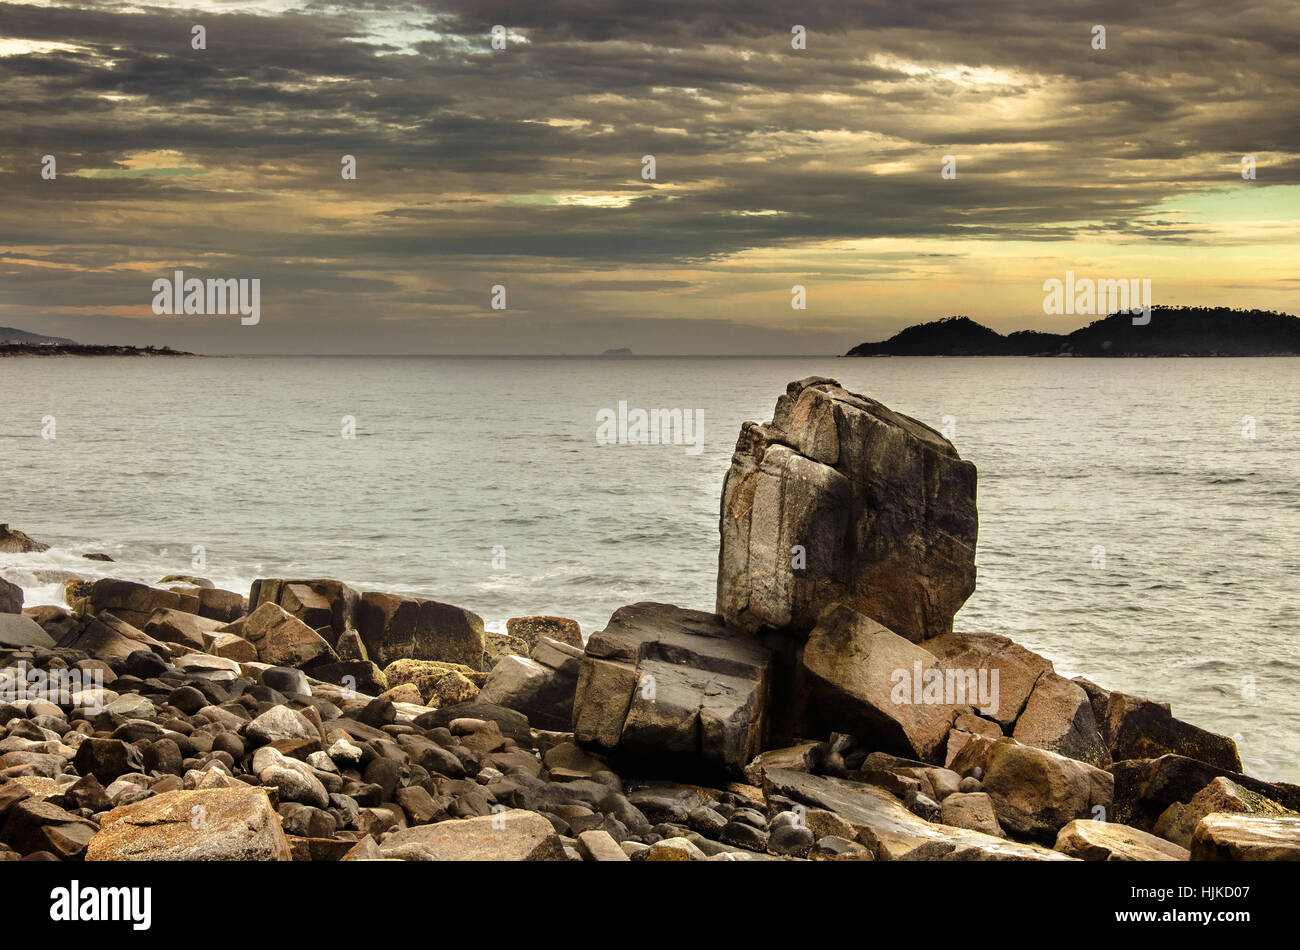 Large pointed stone among the rocky formations by the sea. Golden hour sunset with some islands on the background. Morro das Pedras, Florianopolis, Br Stock Photo